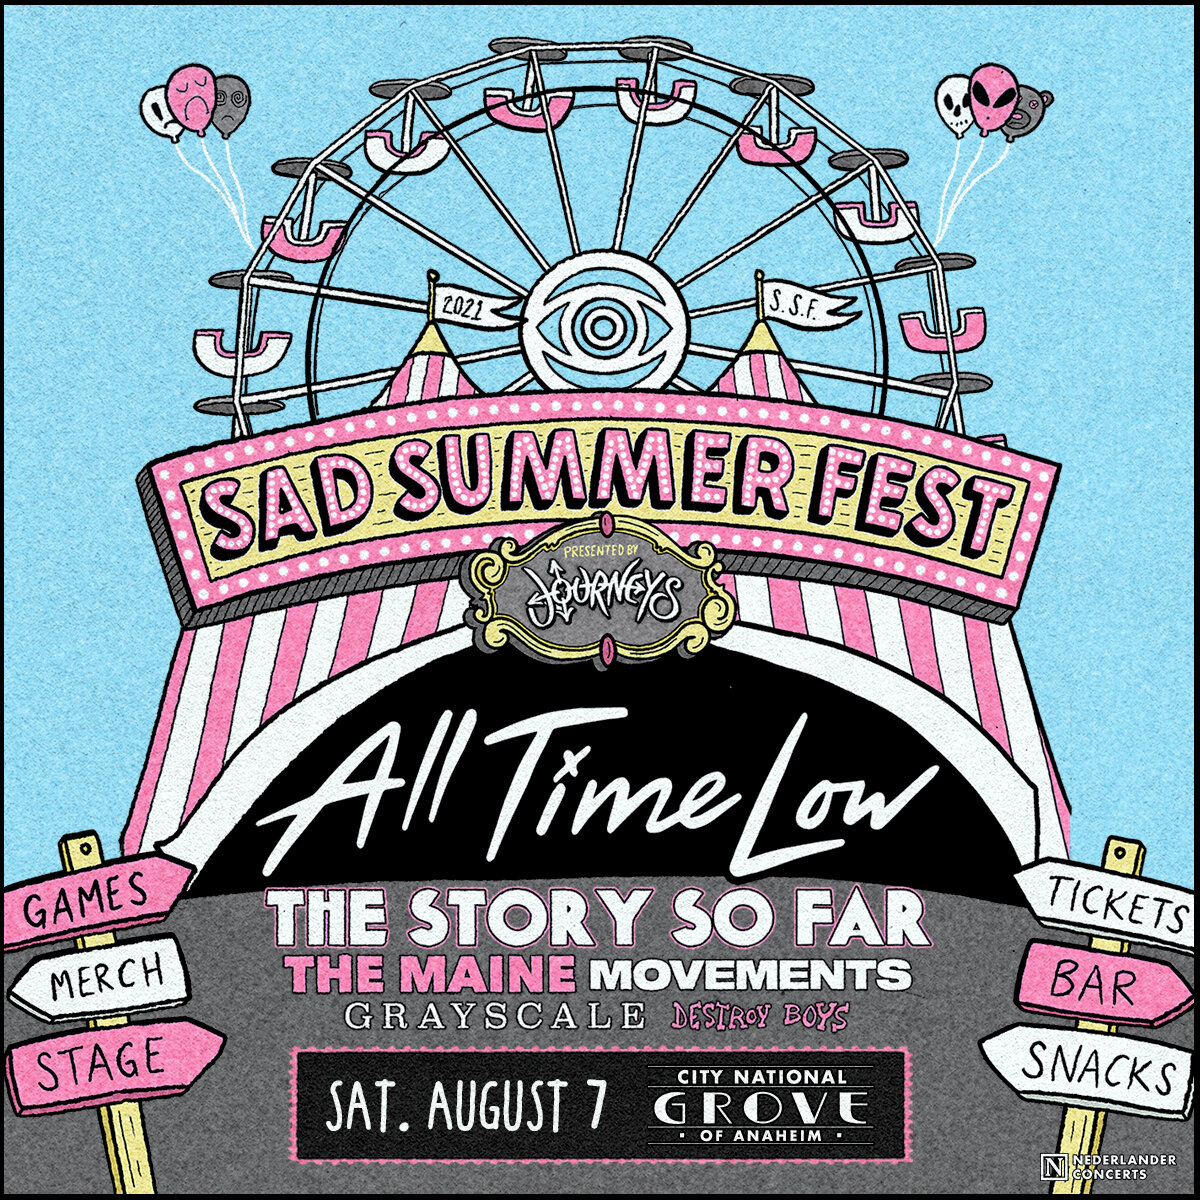 Journeys' Sad Summer Fest brings Summer fun with live performances by